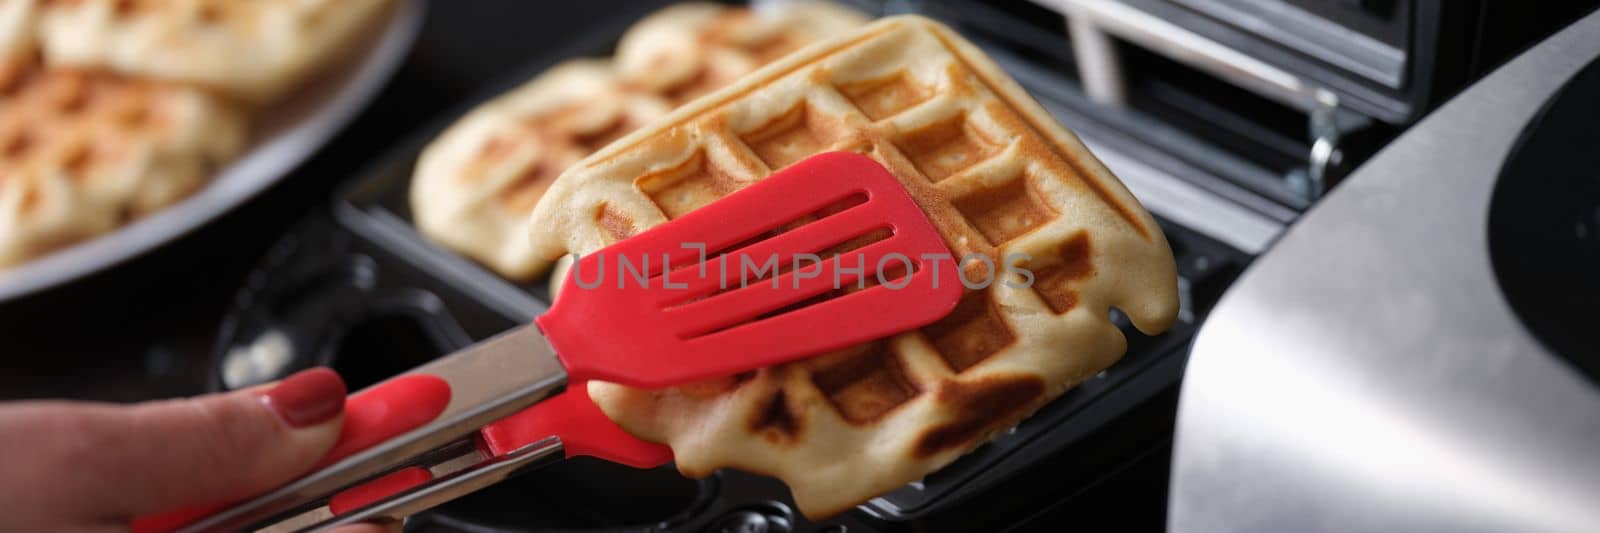 Pastry chef takes hot waffles from waffle iron in kitchen. Cooking sweet delicious dessert at home